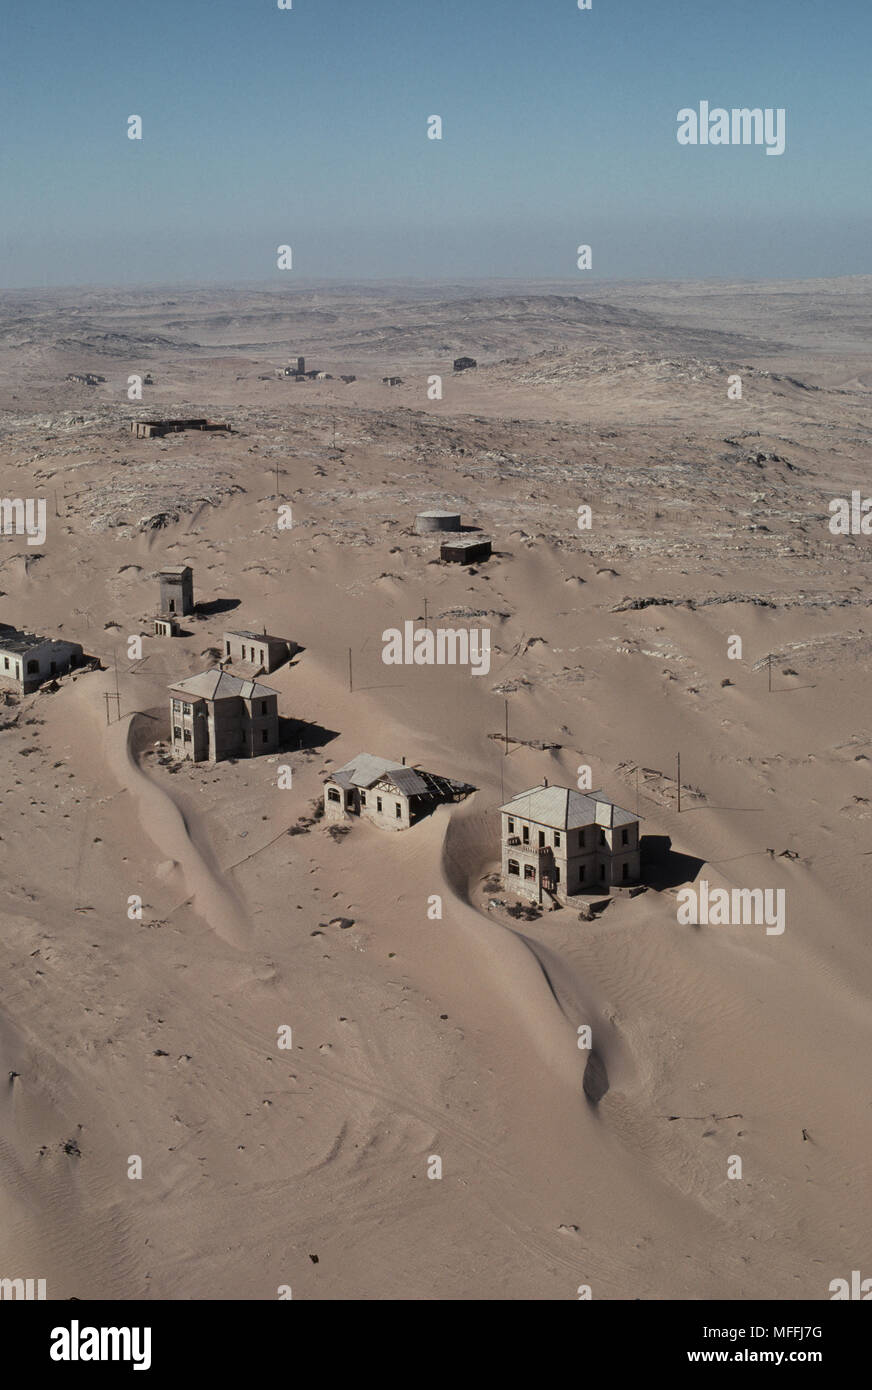 GHOST TOWN OF KOLMAN'S KOP engulfed by sands of Namib Desert, Namibia, SW Africa Stock Photo